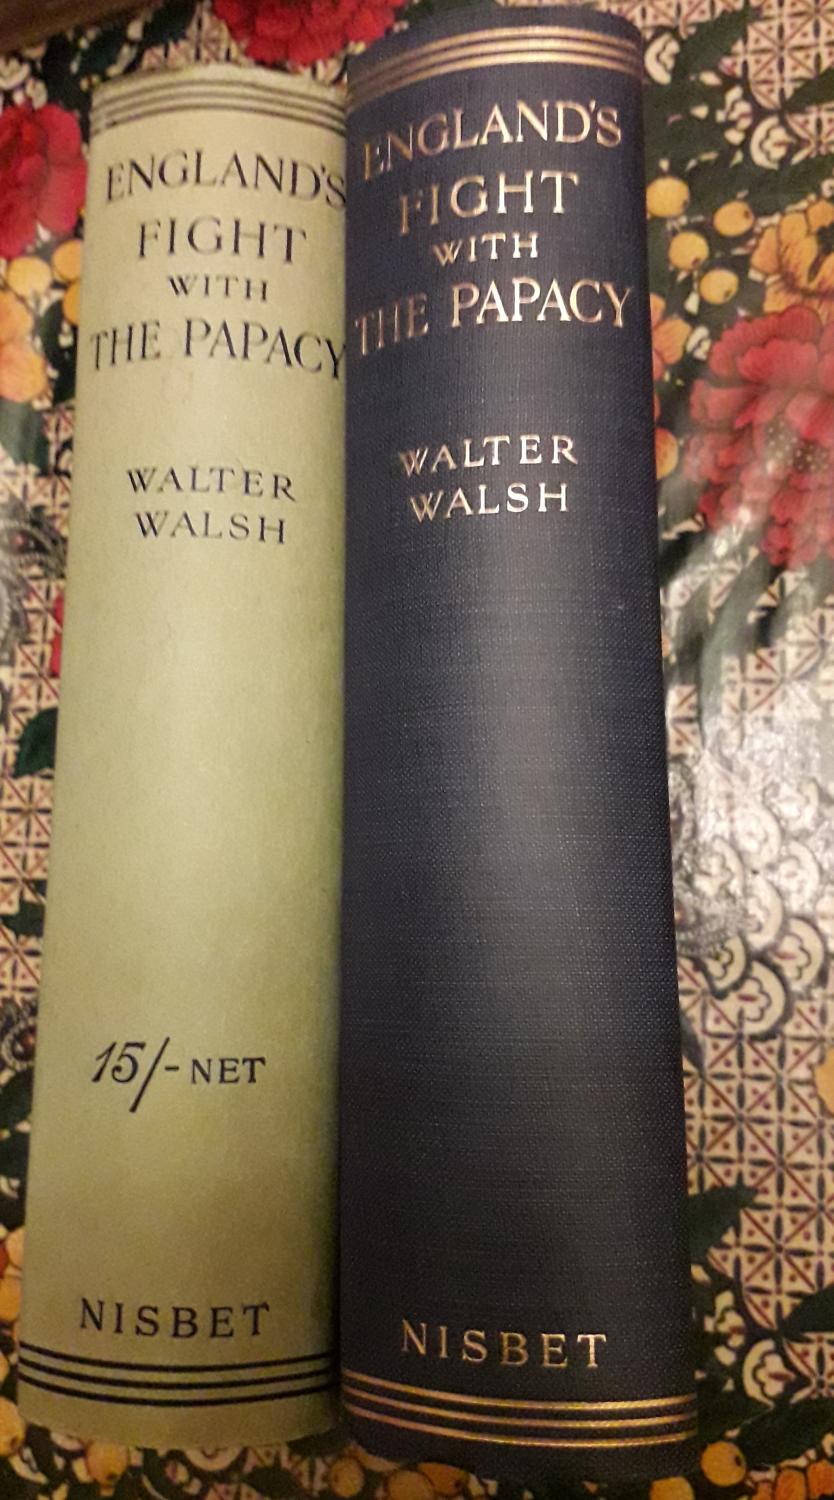 a Political History" by Walter Walsh 1912 "England's Fight with the Papacy 